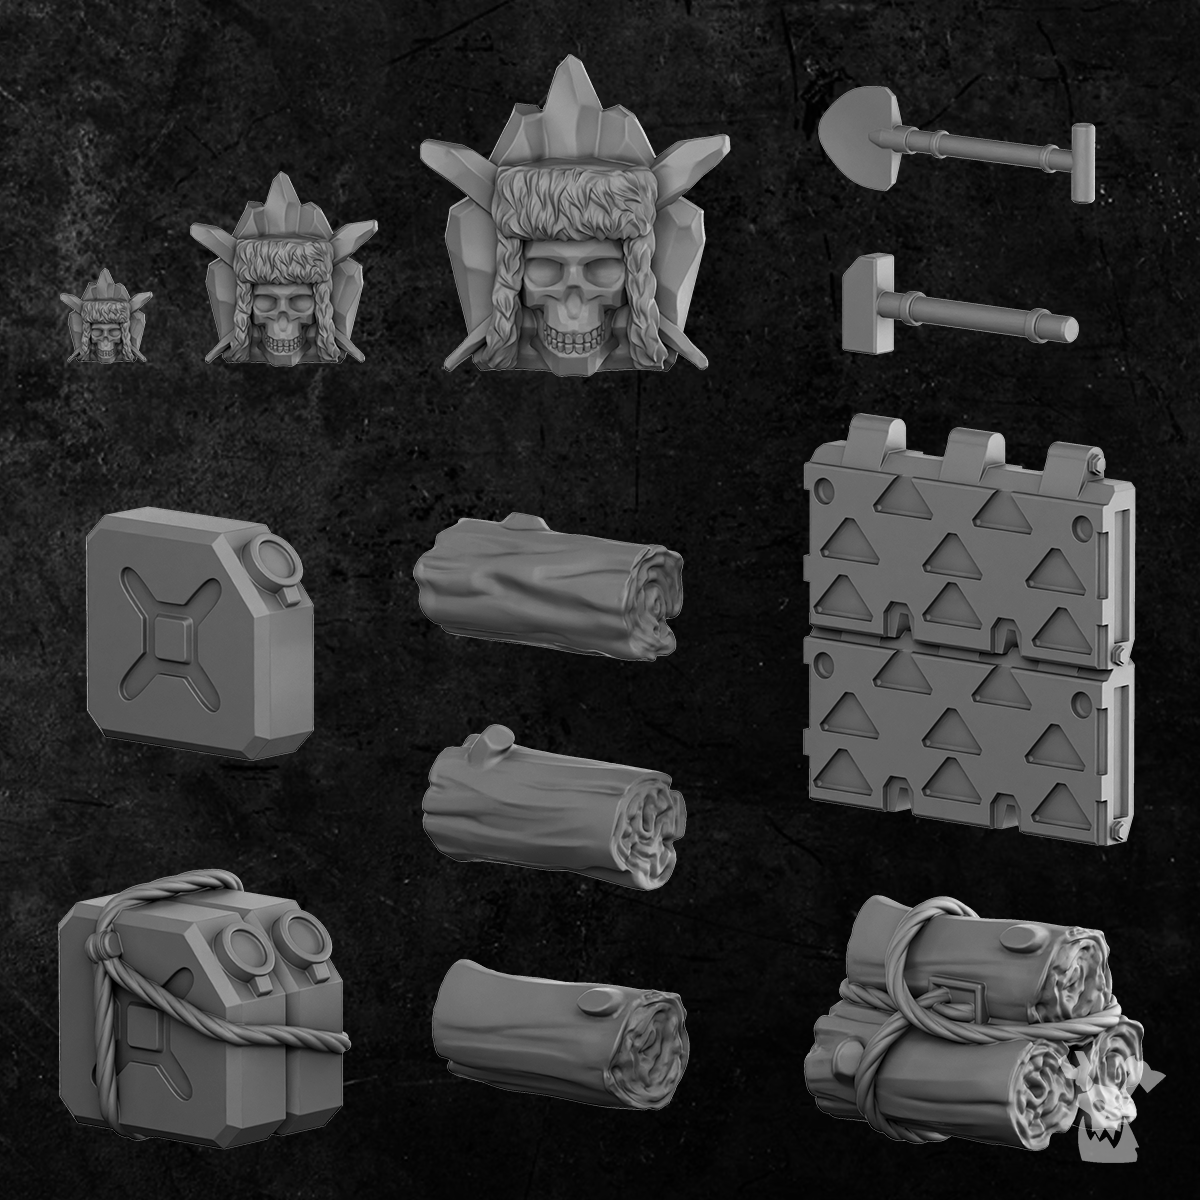 Kit# 9509 - Mountainman - Shell Game Swindler Resin - This is part of the  Valiant Miniatures Hobby Kit Collection, it is a 54mm Unpainted and  Unassembled resin Hobby kit Manufactured in